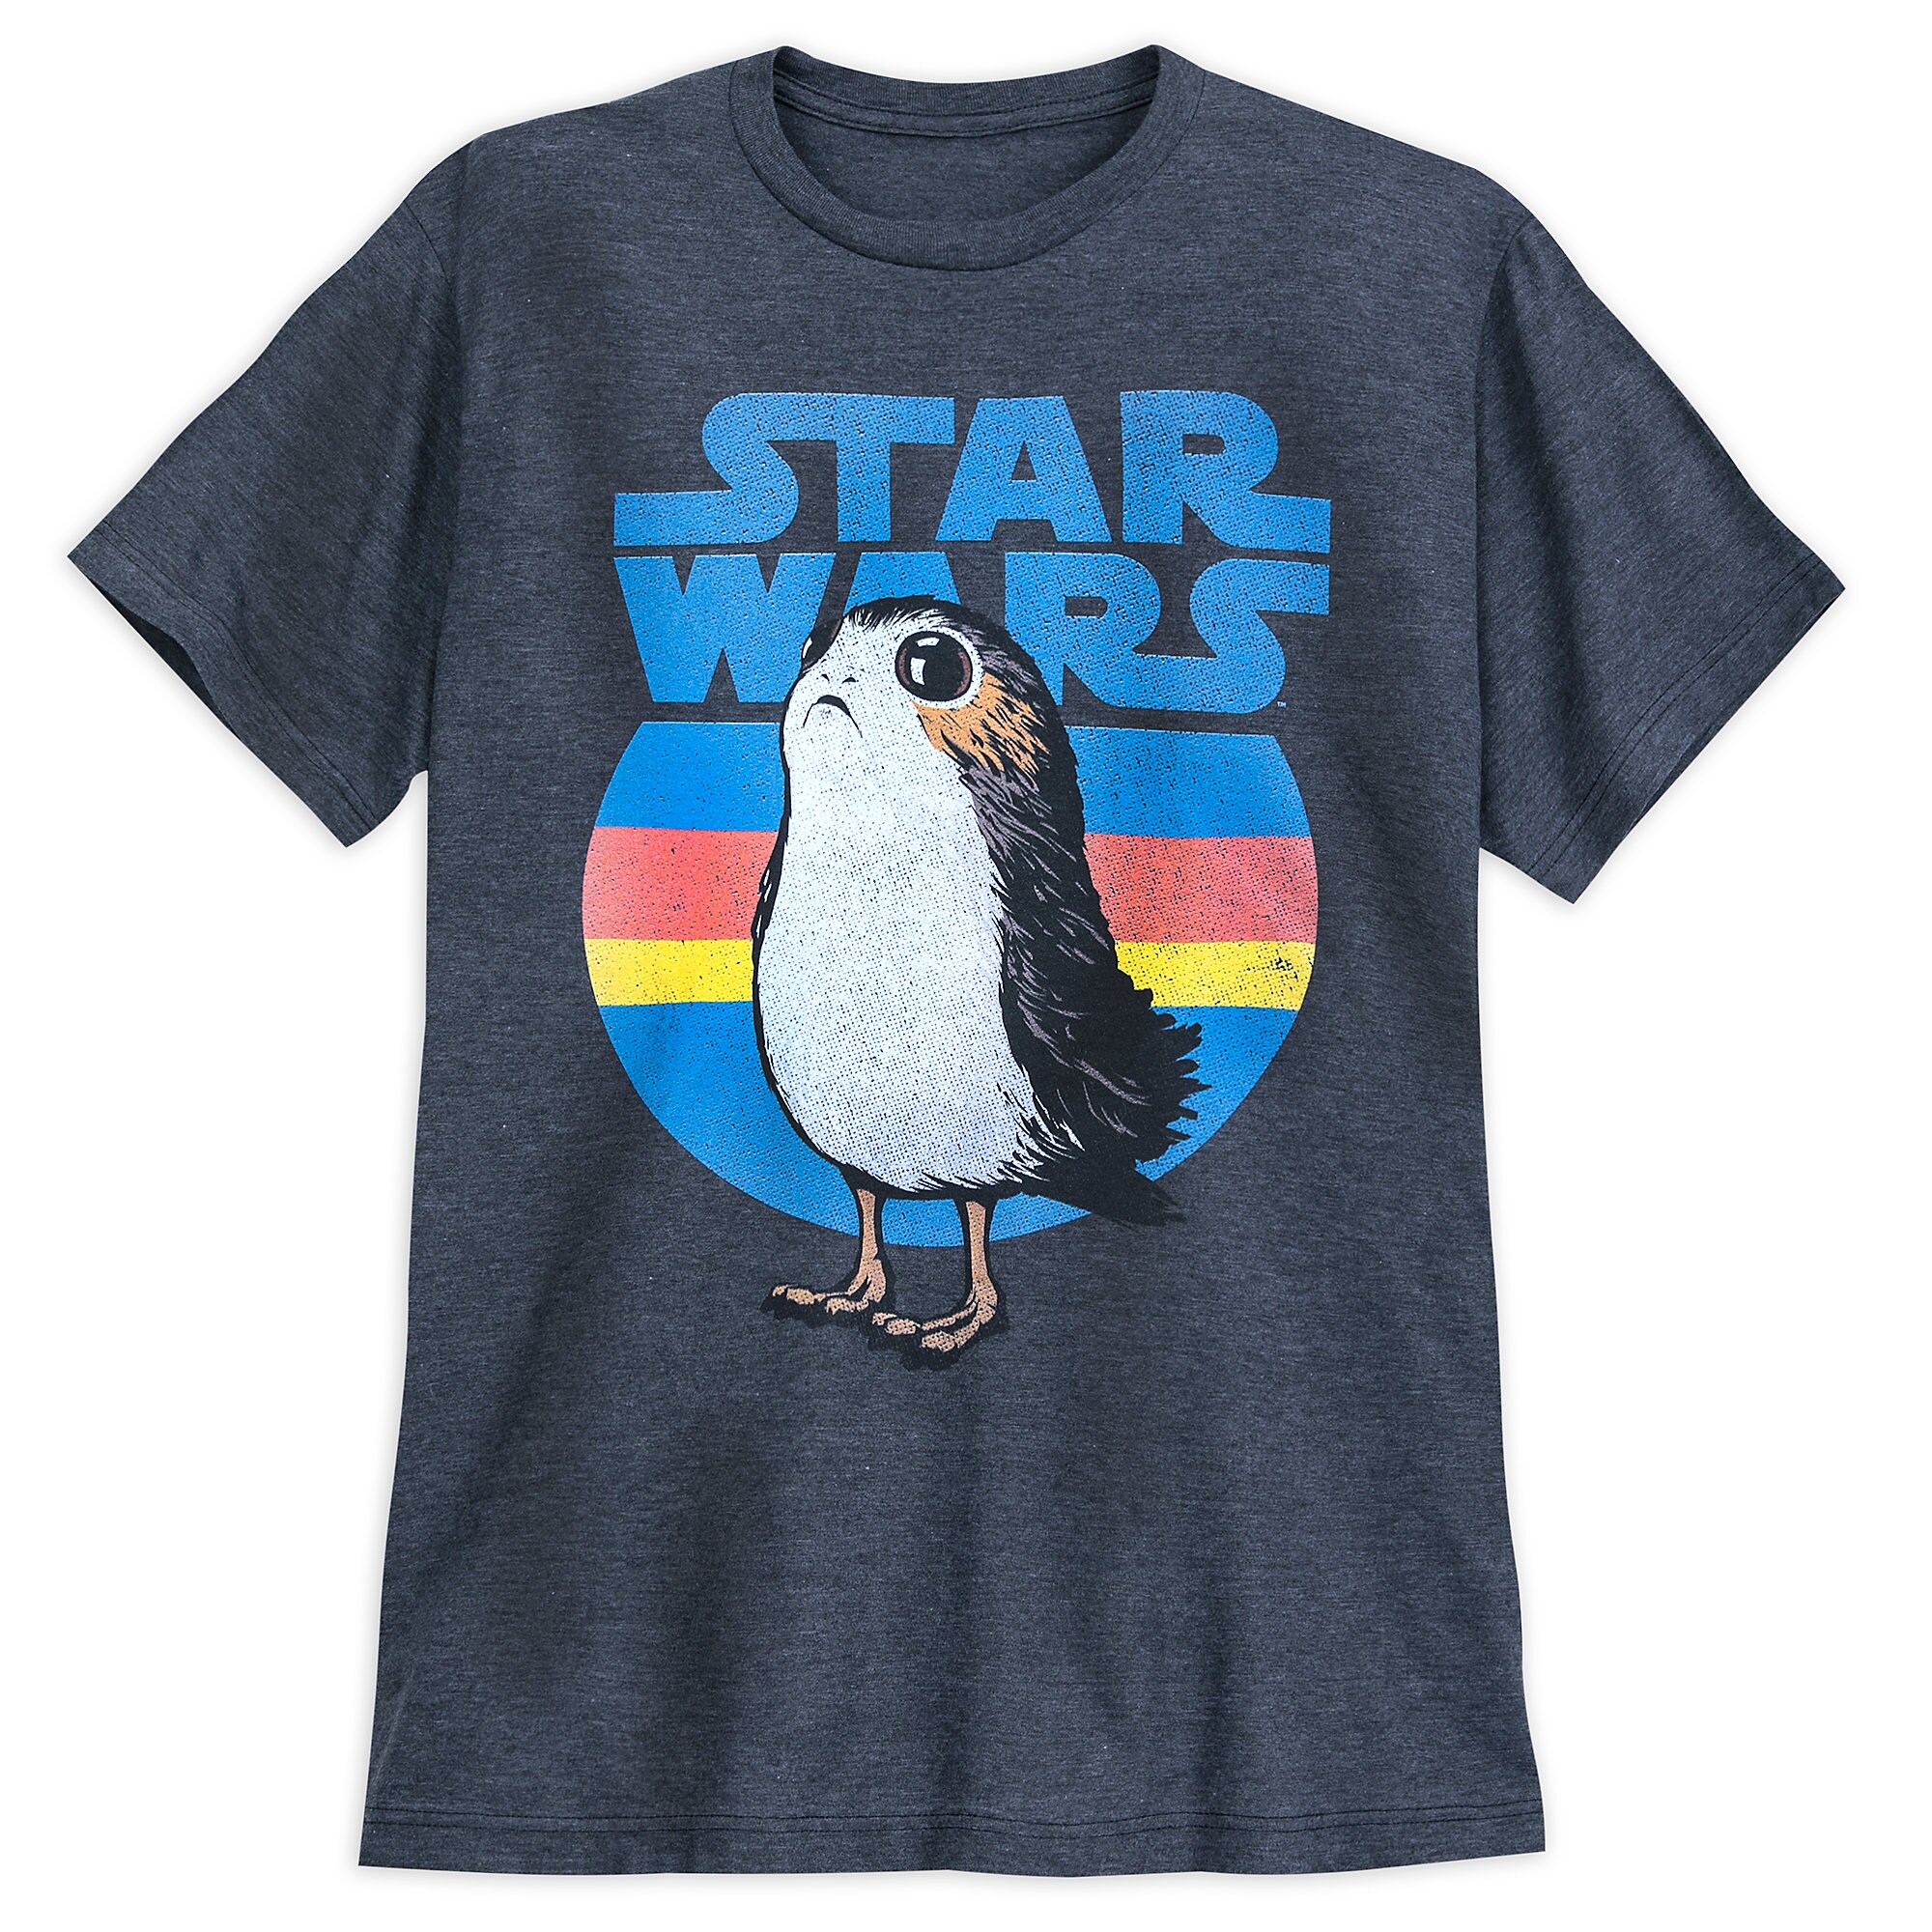 Porg T-Shirt for Adults - Star Wars